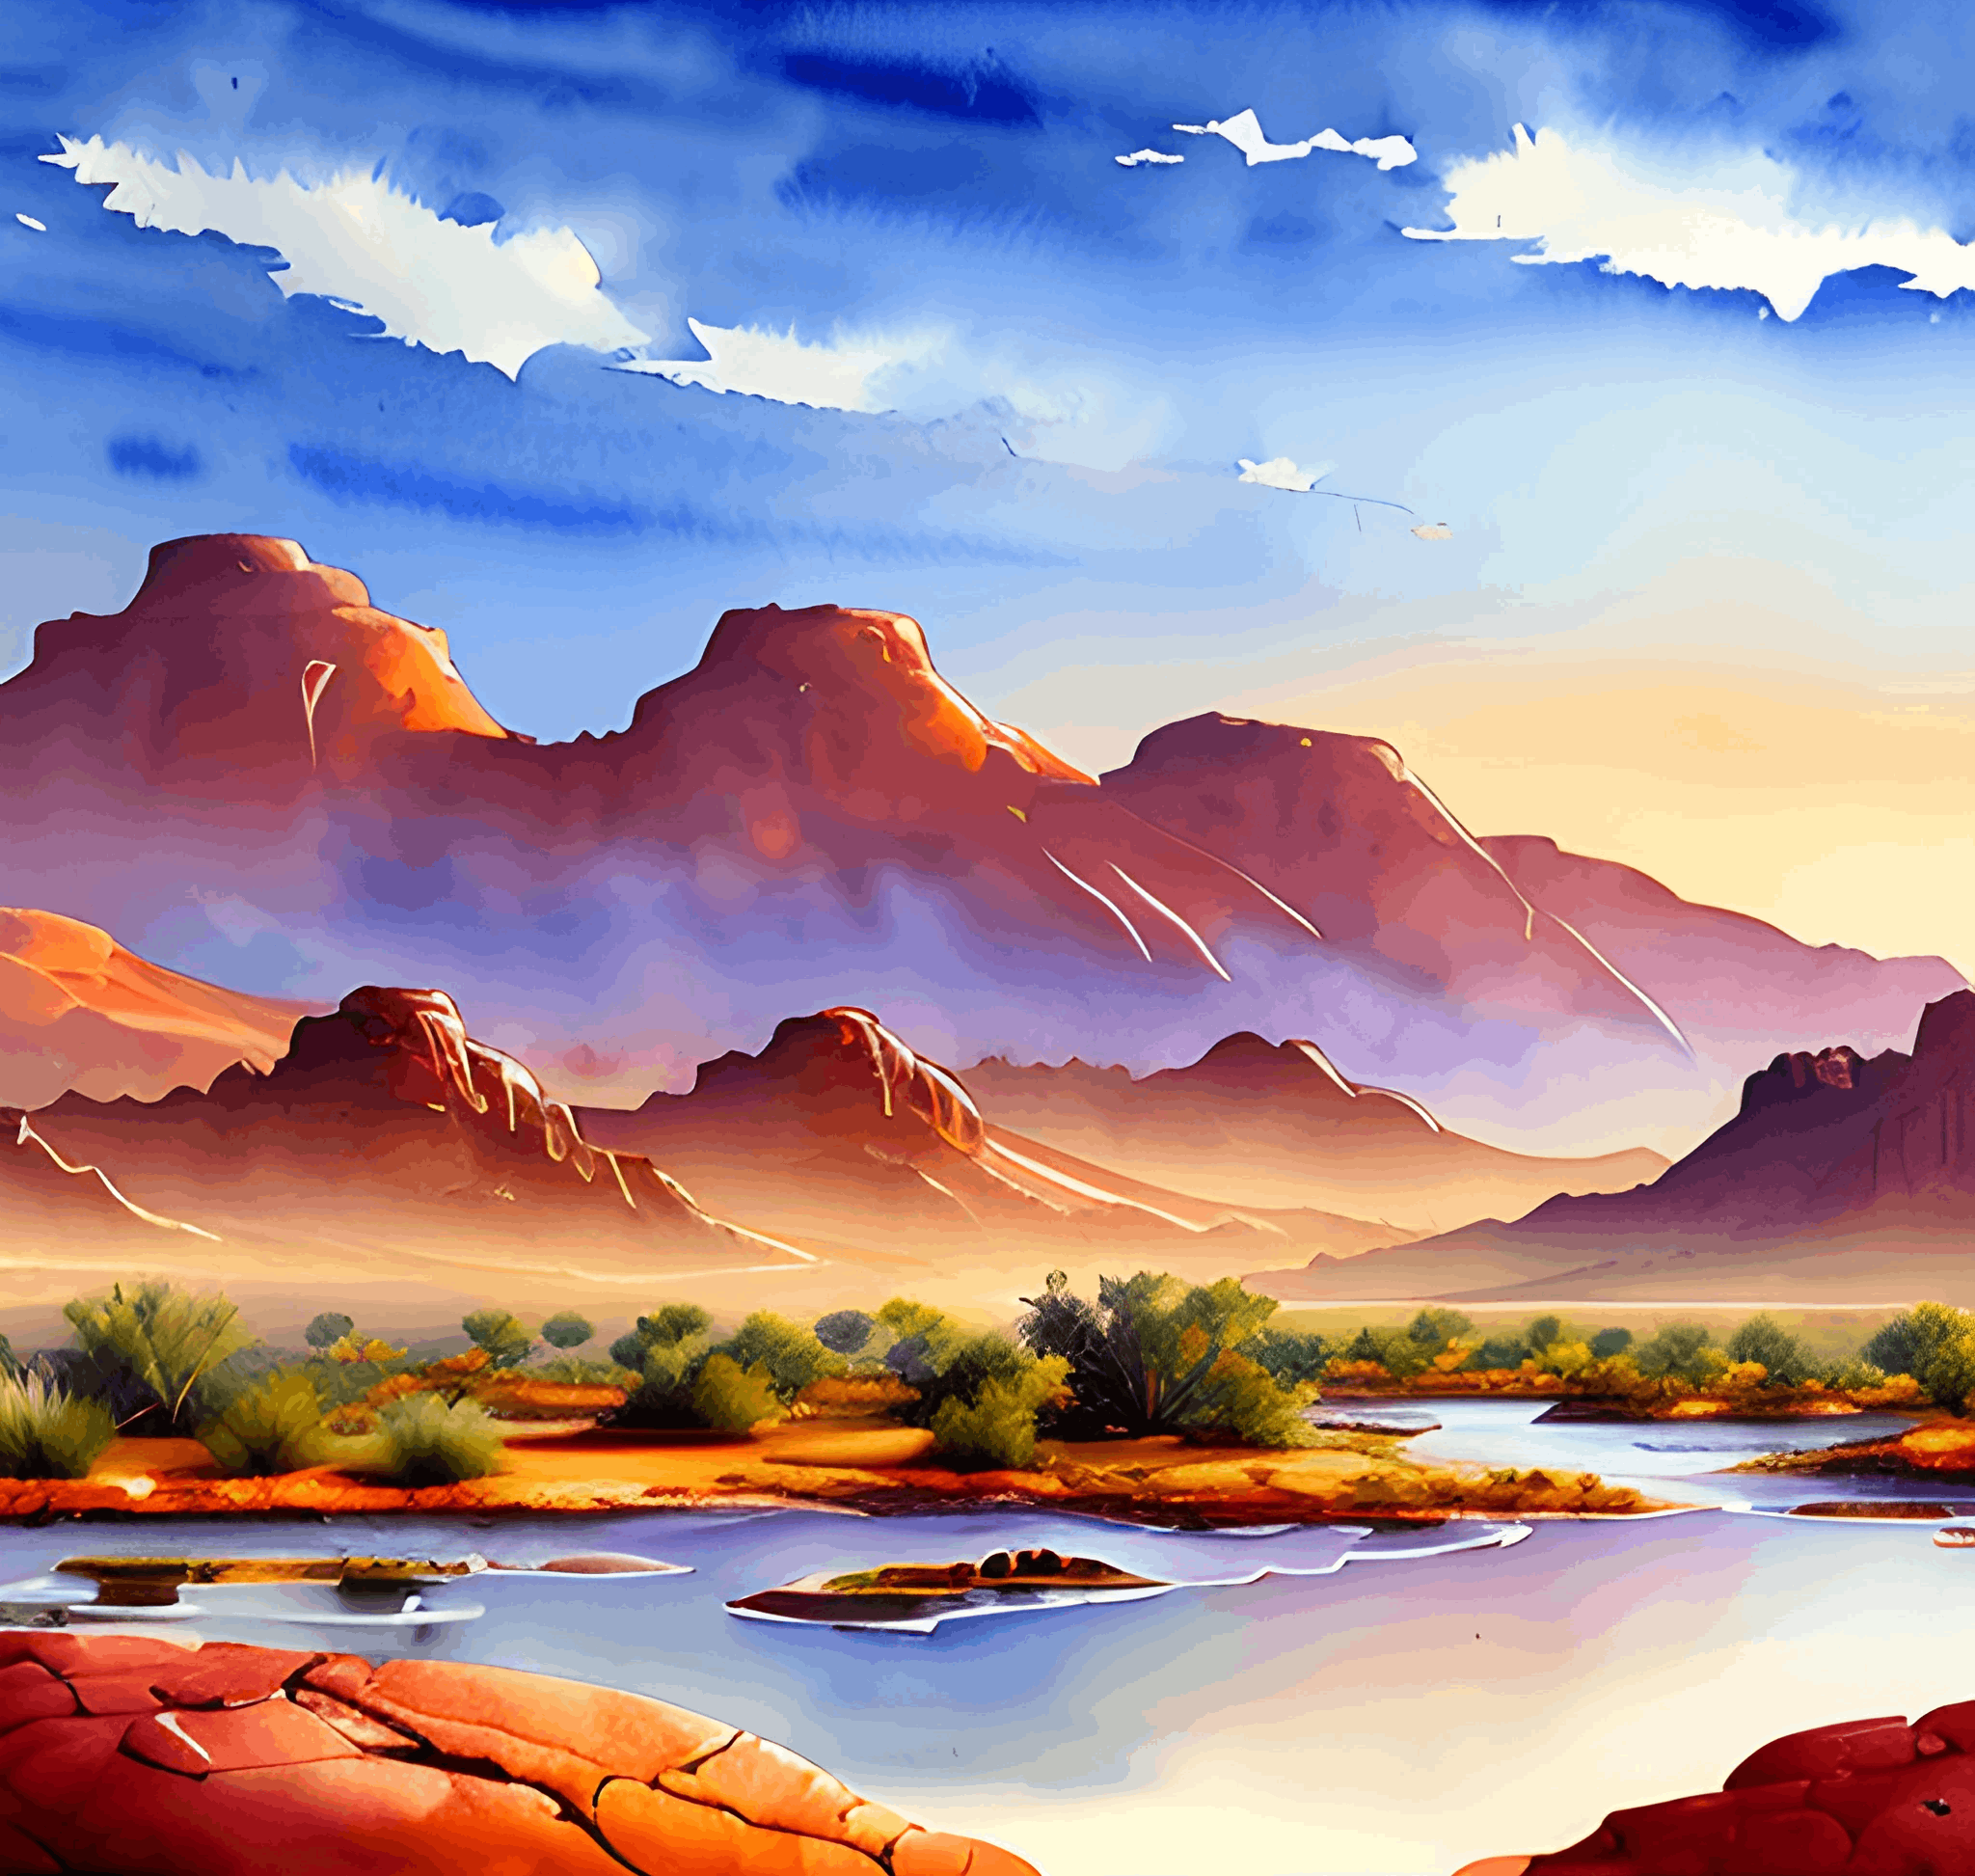 painting of a desert landscape with a river and mountains in the background